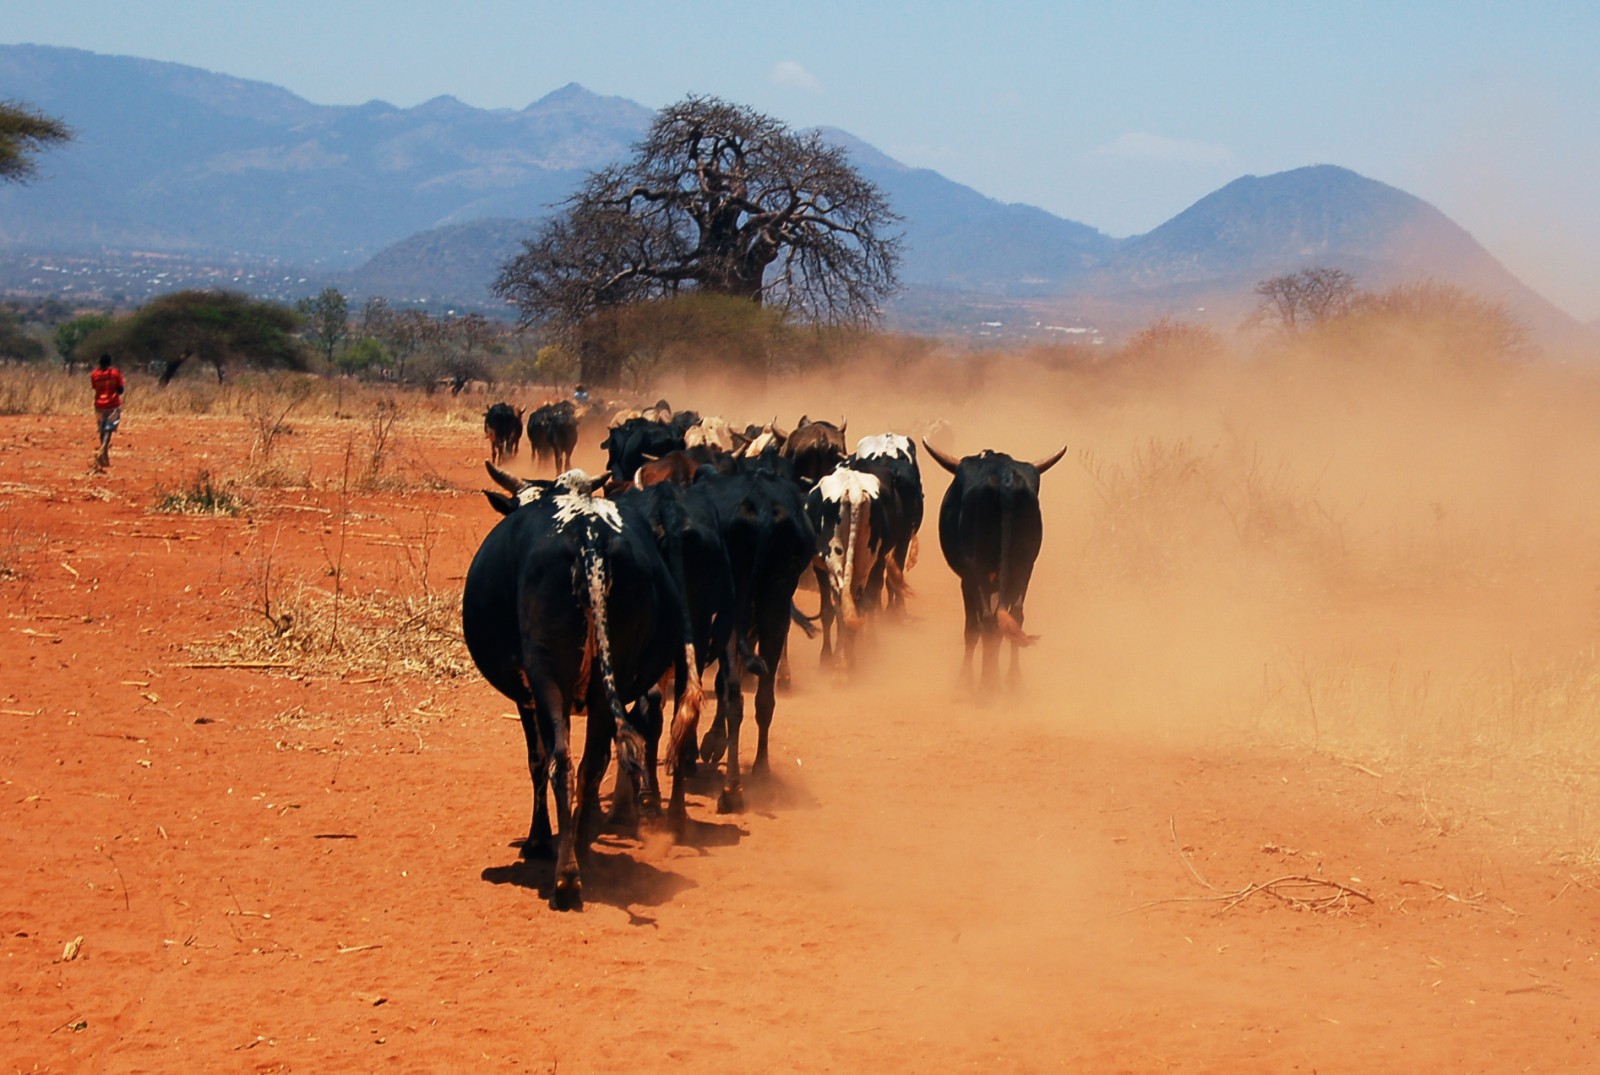 Cattle raise a dust cloud near Kongwa, Tanzania. Some cattle farmers within the country's Southern Agricultural Growth Corridor say they are being forcibly evicted from their land. Photo courtesy BCClimateChampions via Flickr Creative Commons 